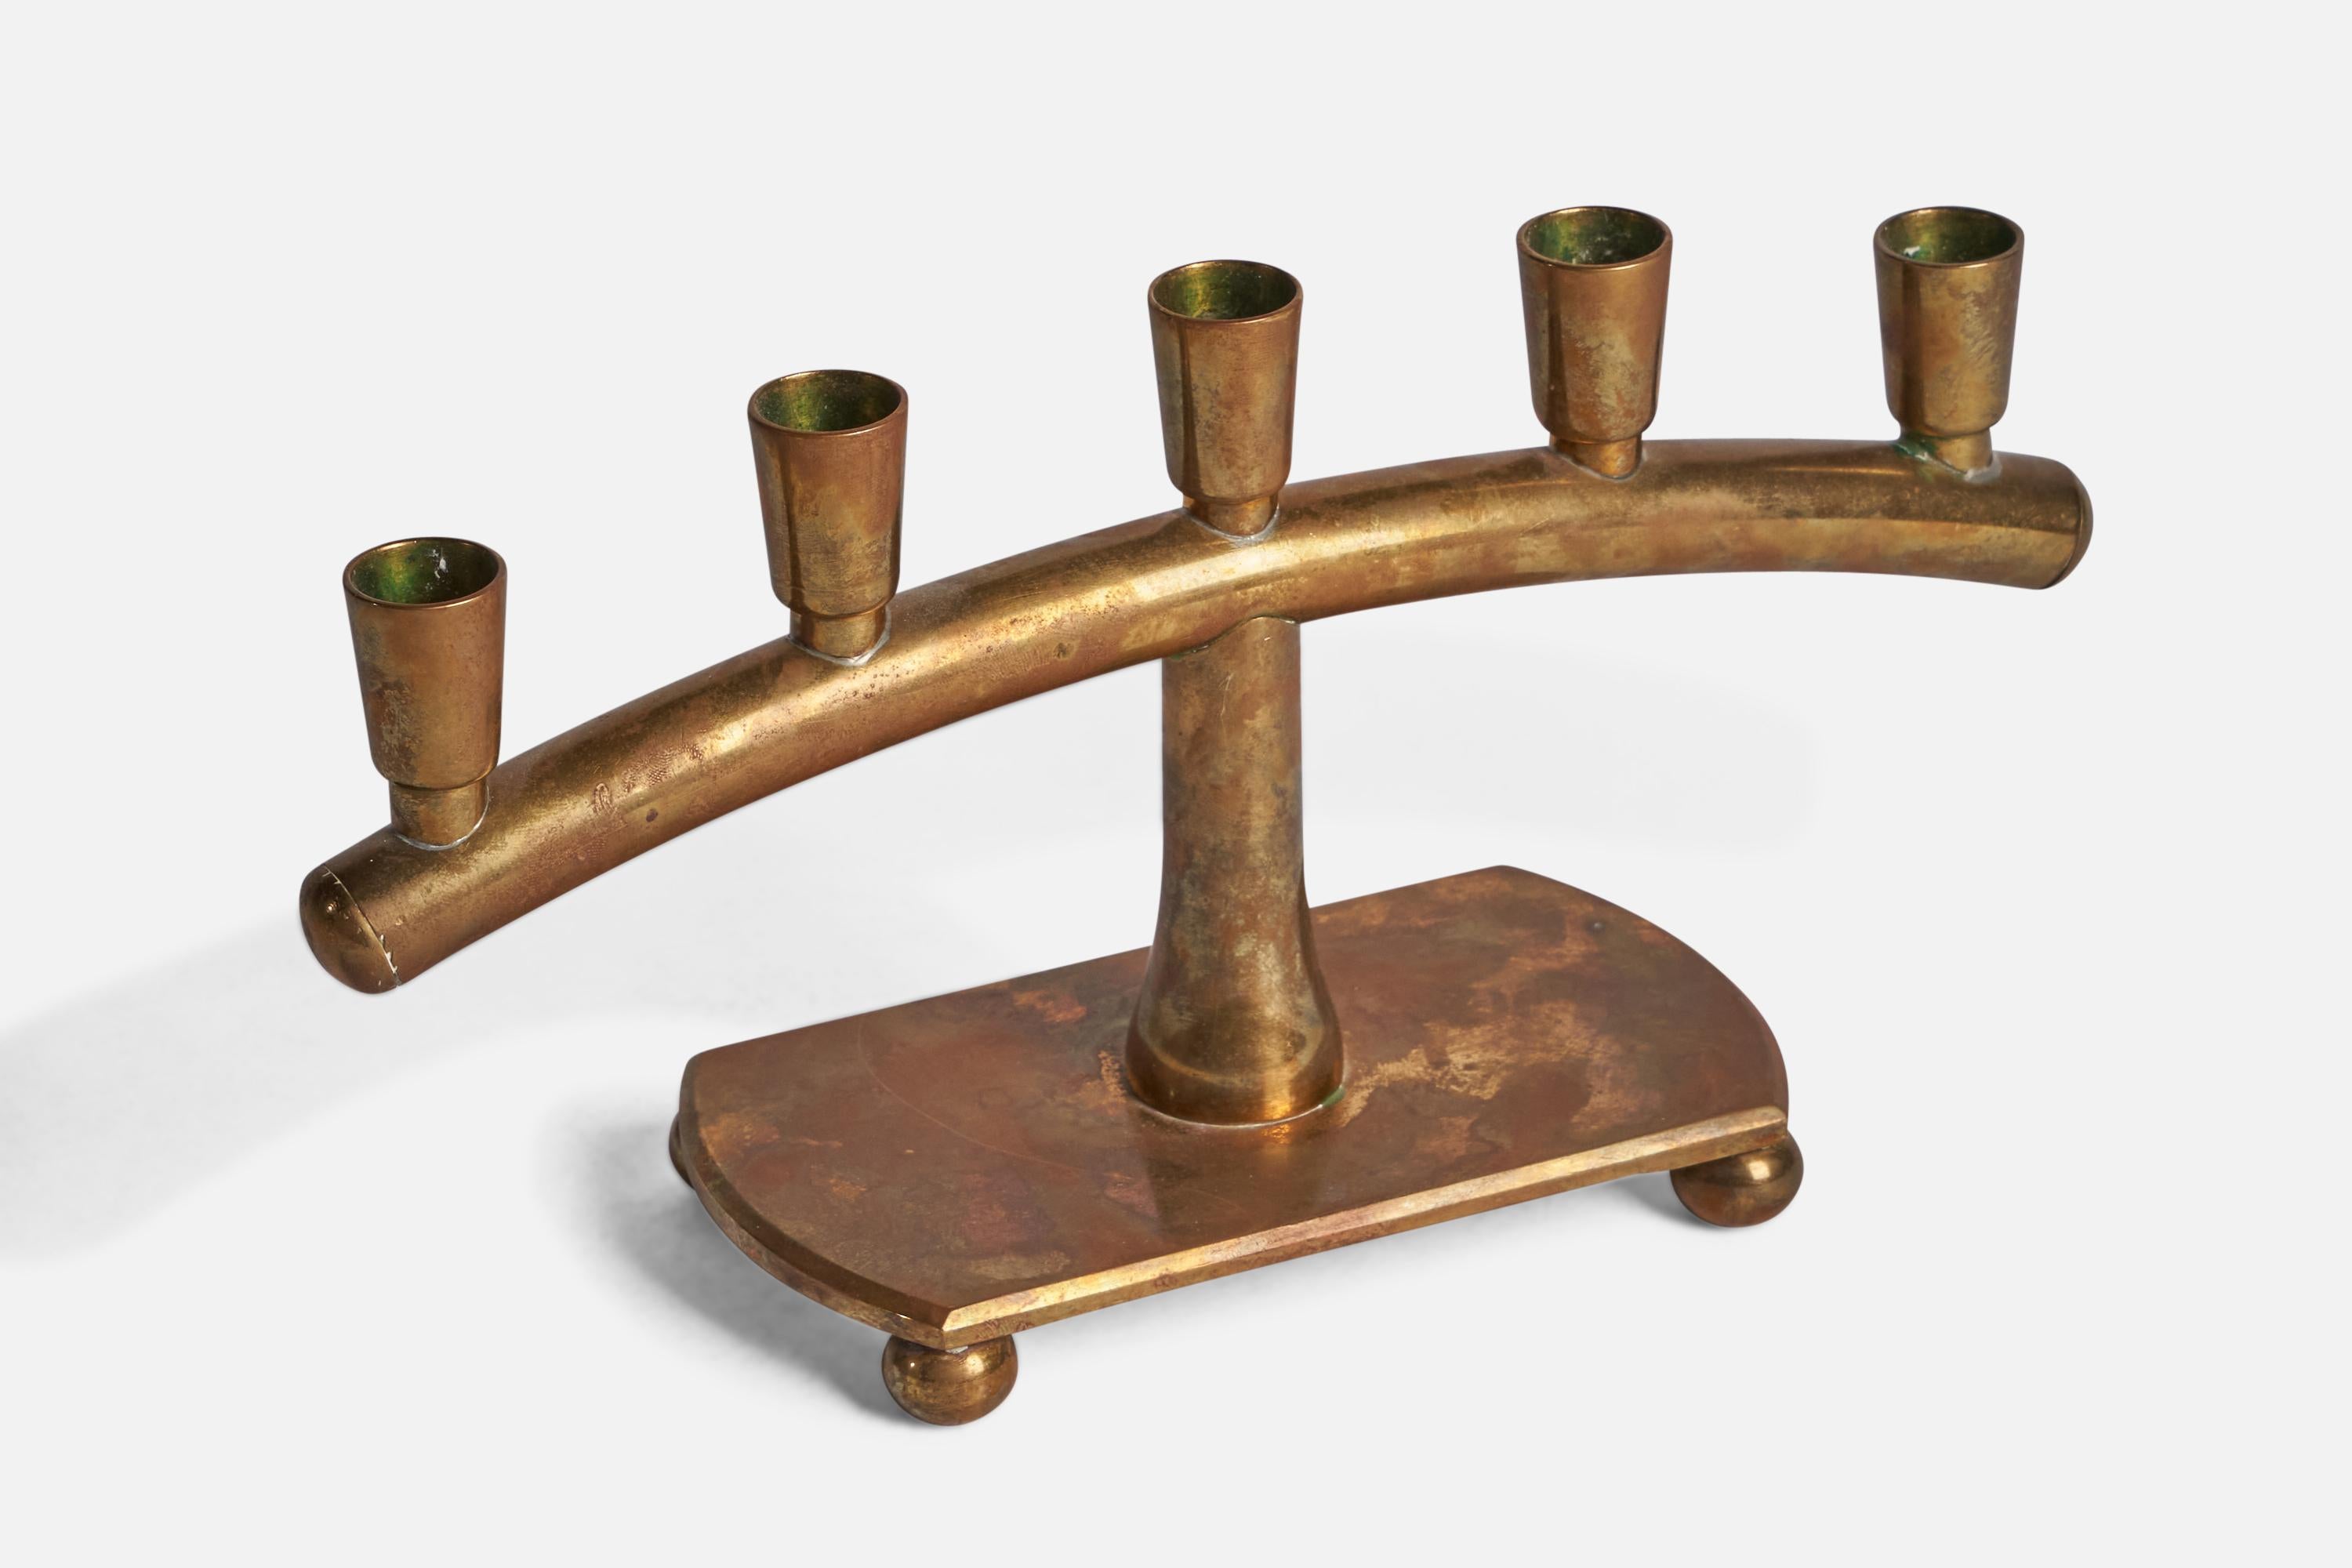 A brass candelabra attributed to Gusums Bruk, Sweden, c. 1940s.

Hold 0.75” diameter candles